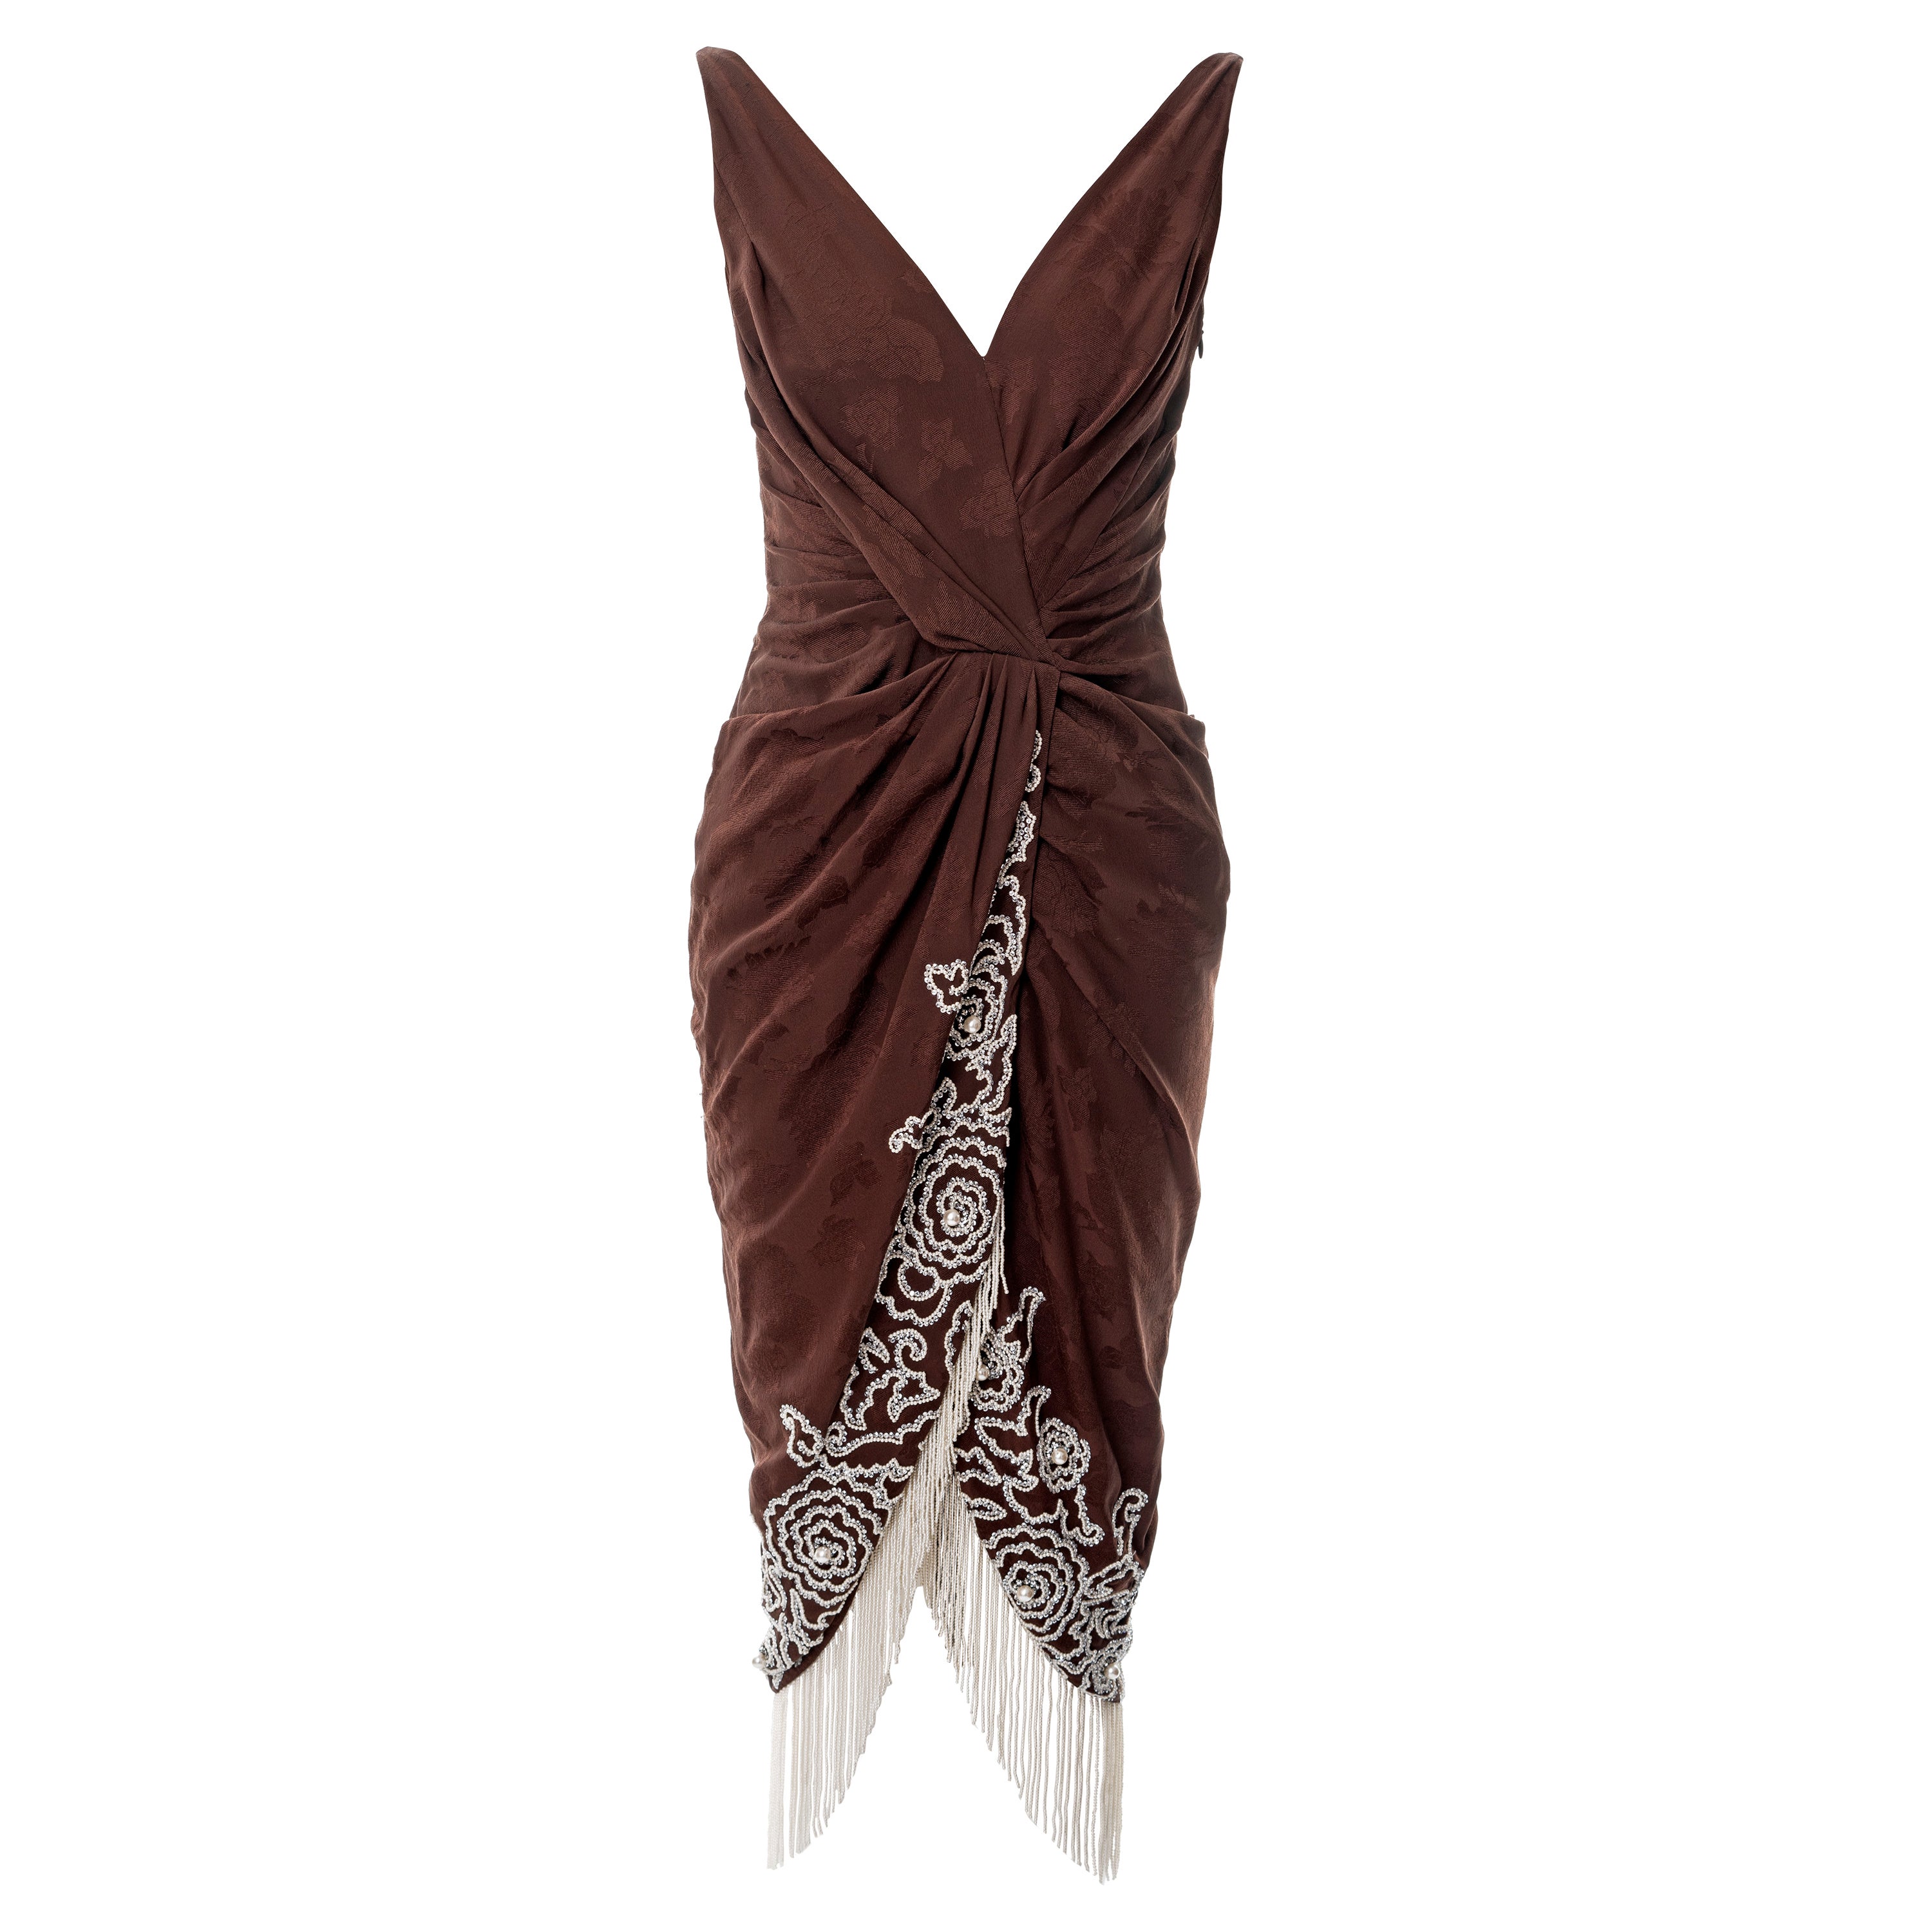 Christian Dior by John Galliano pearl beaded brown silk cocktail dress, ss 2008 For Sale